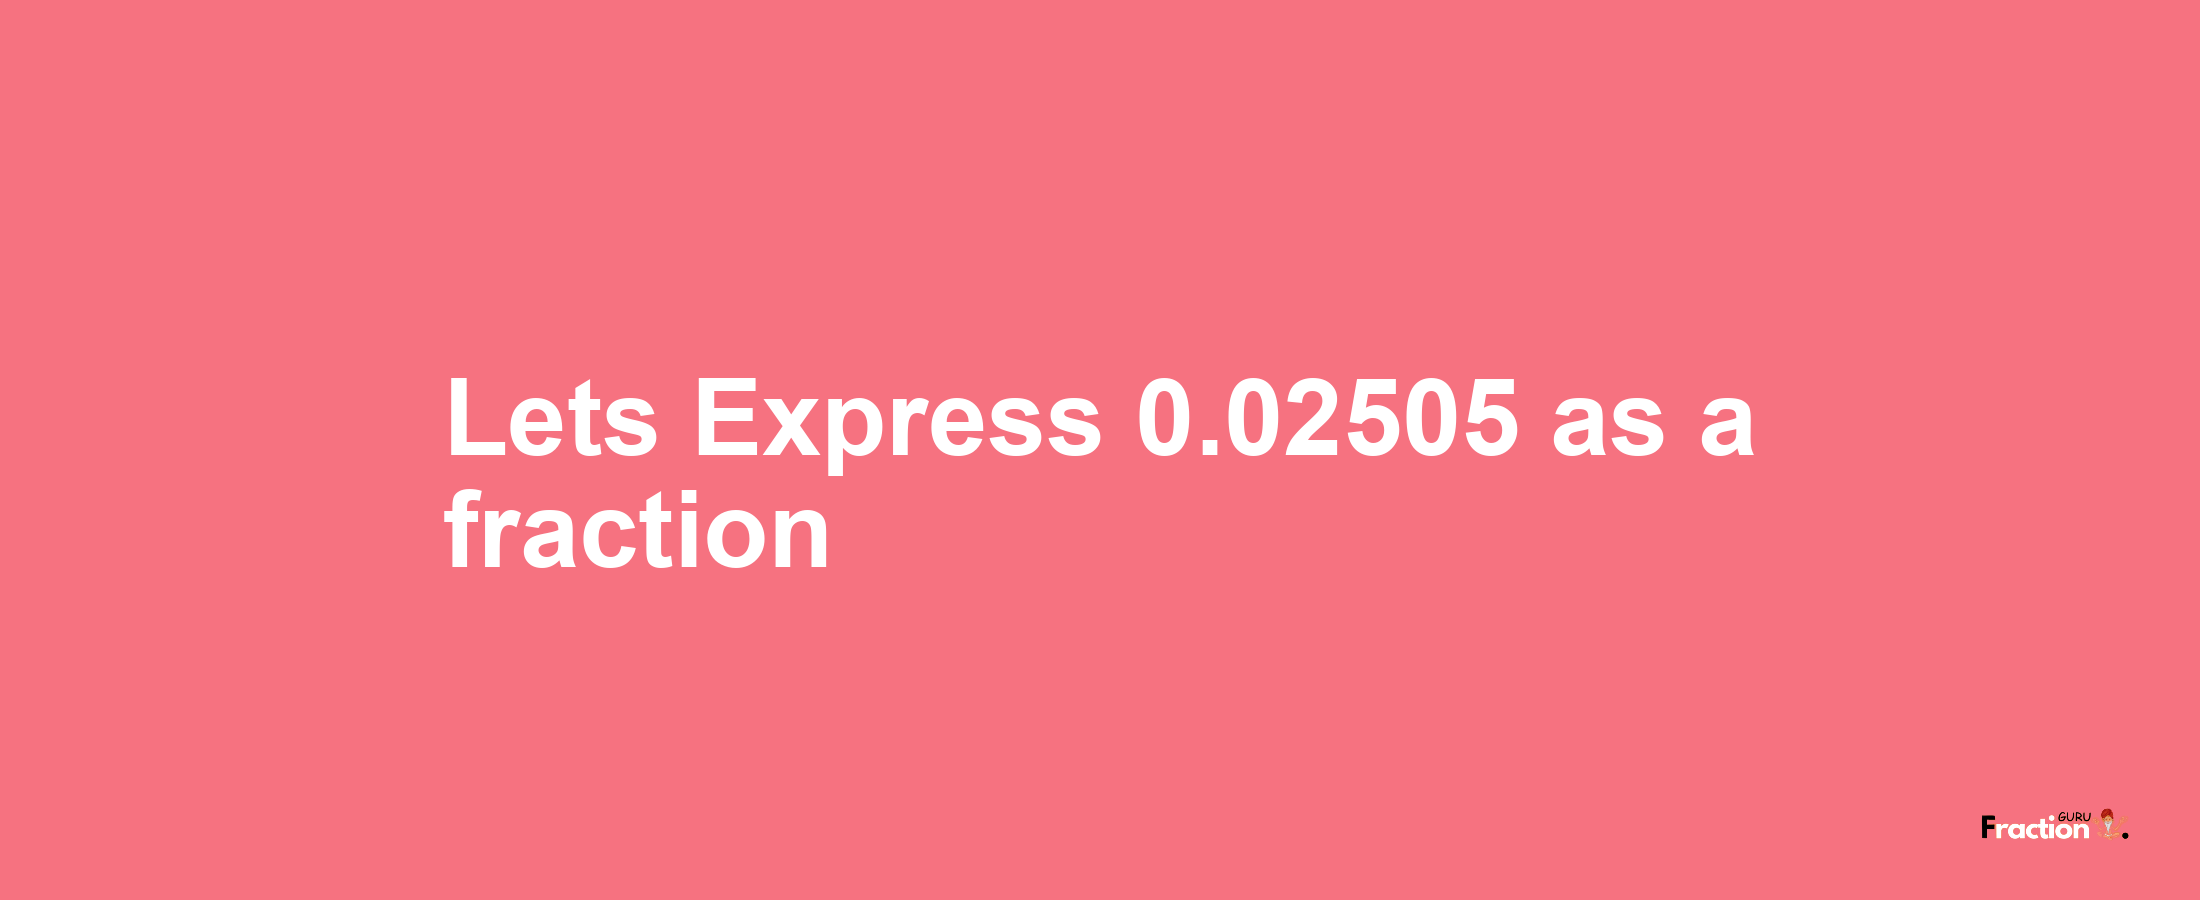 Lets Express 0.02505 as afraction